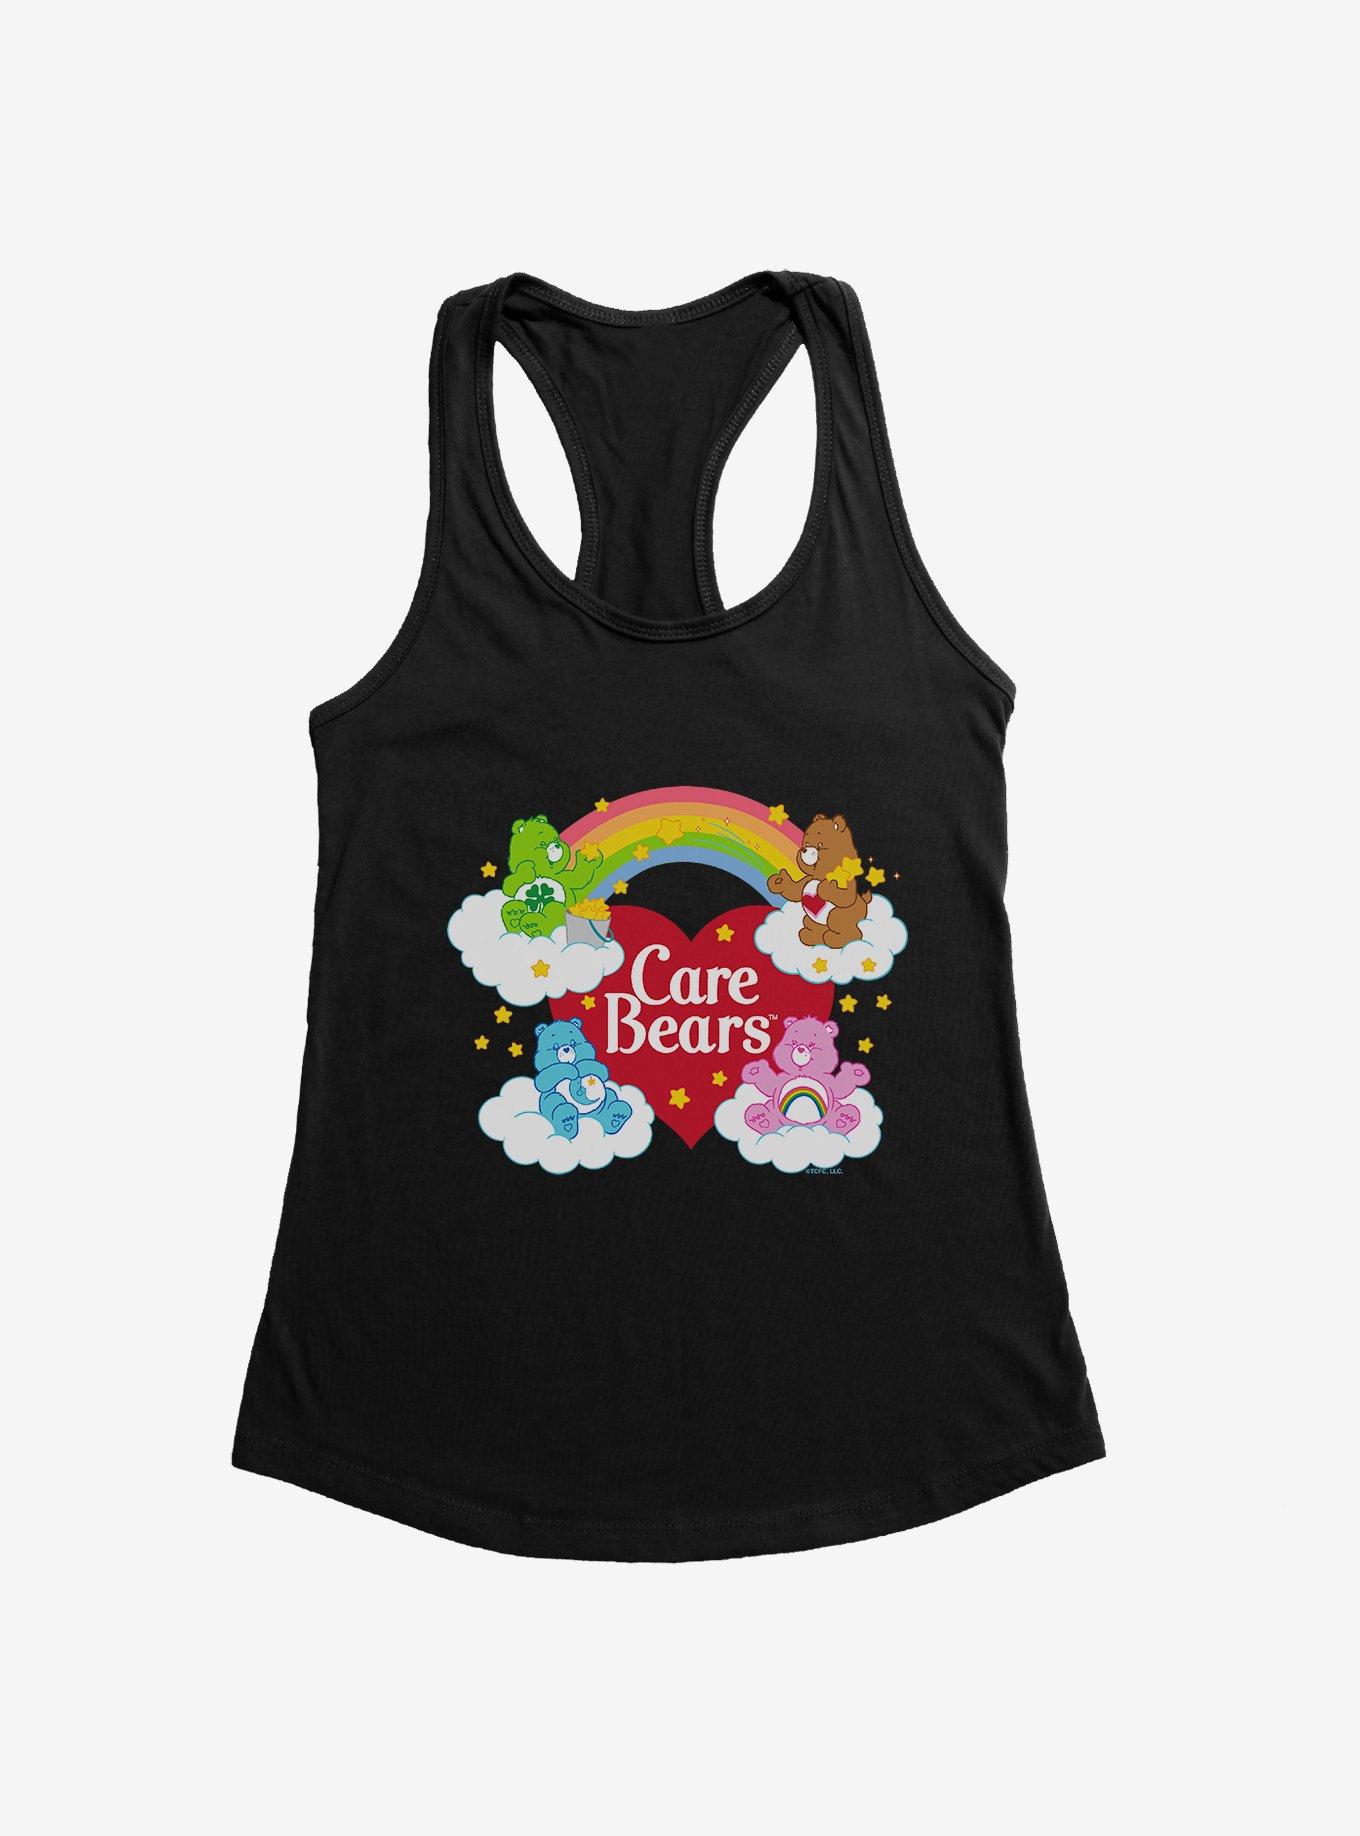 Care Bears Friends On Clouds Girls Tank, BLACK, hi-res